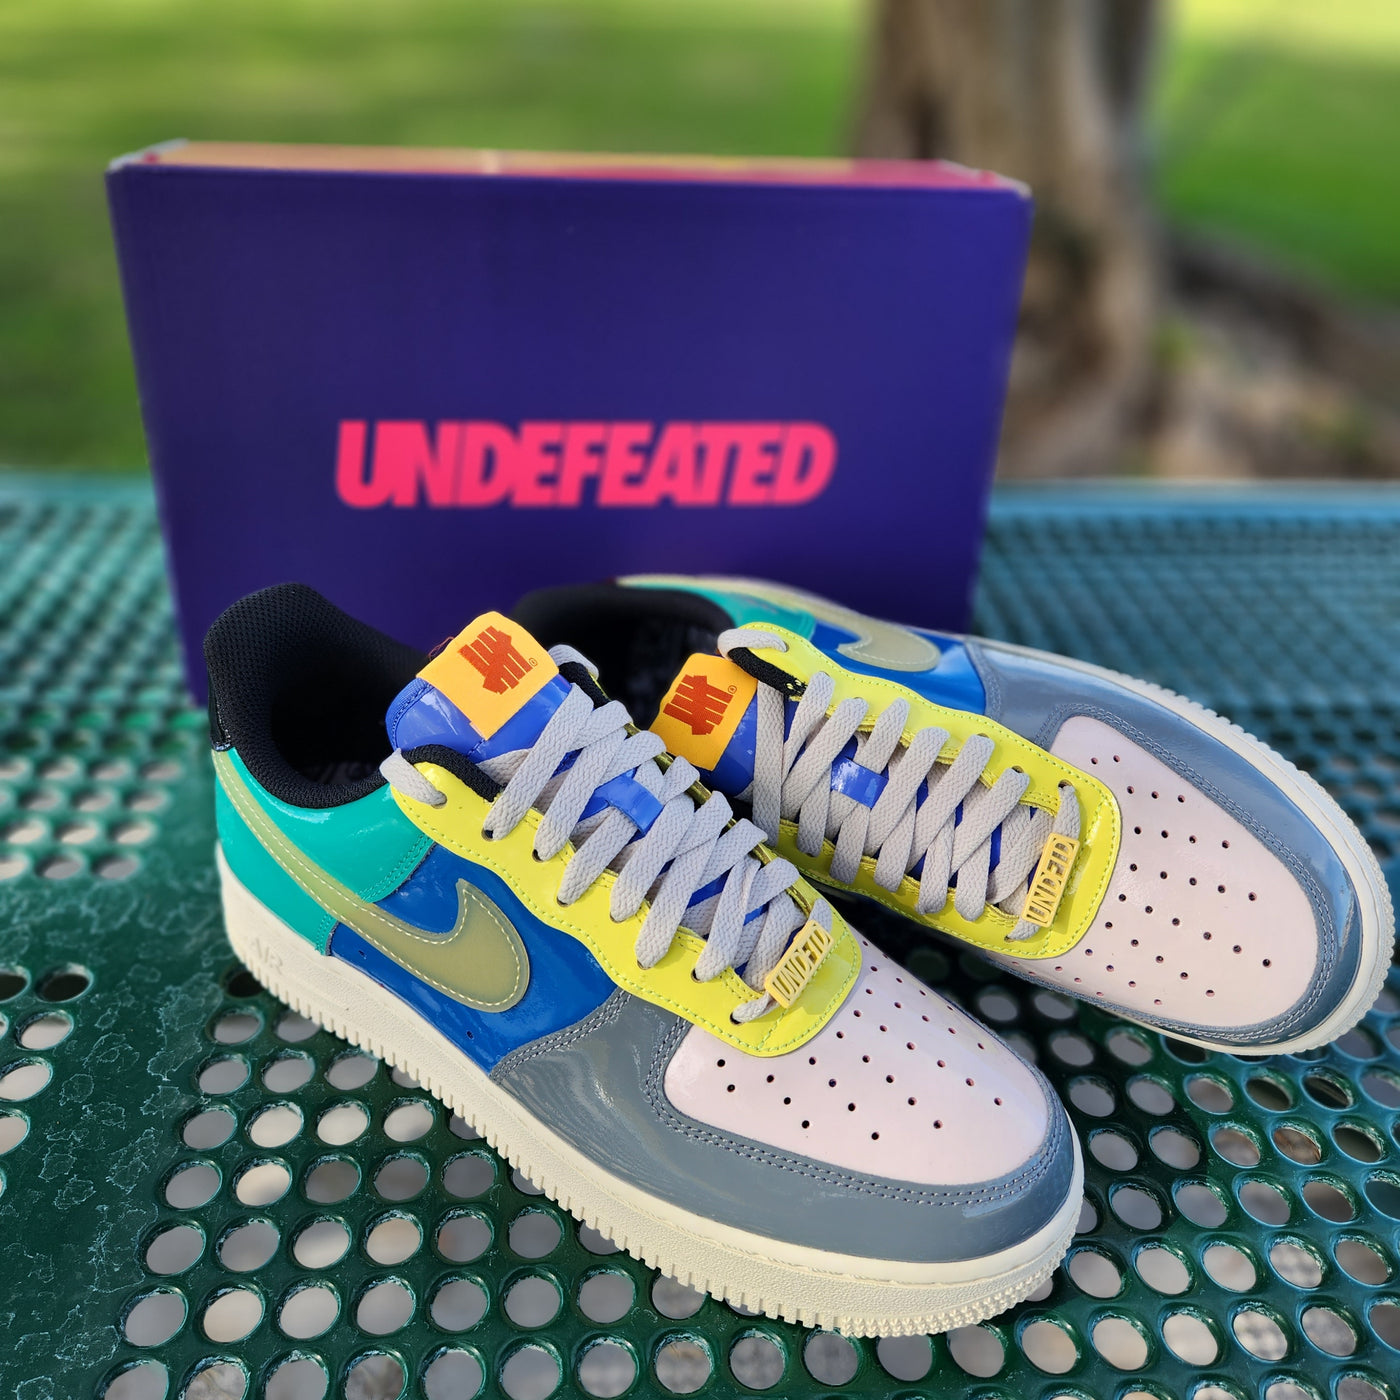 UNDEFEATED X NIKE AIR FORCE 1 LOW SP - SMOKEGREY/ GOLD/ MULTI